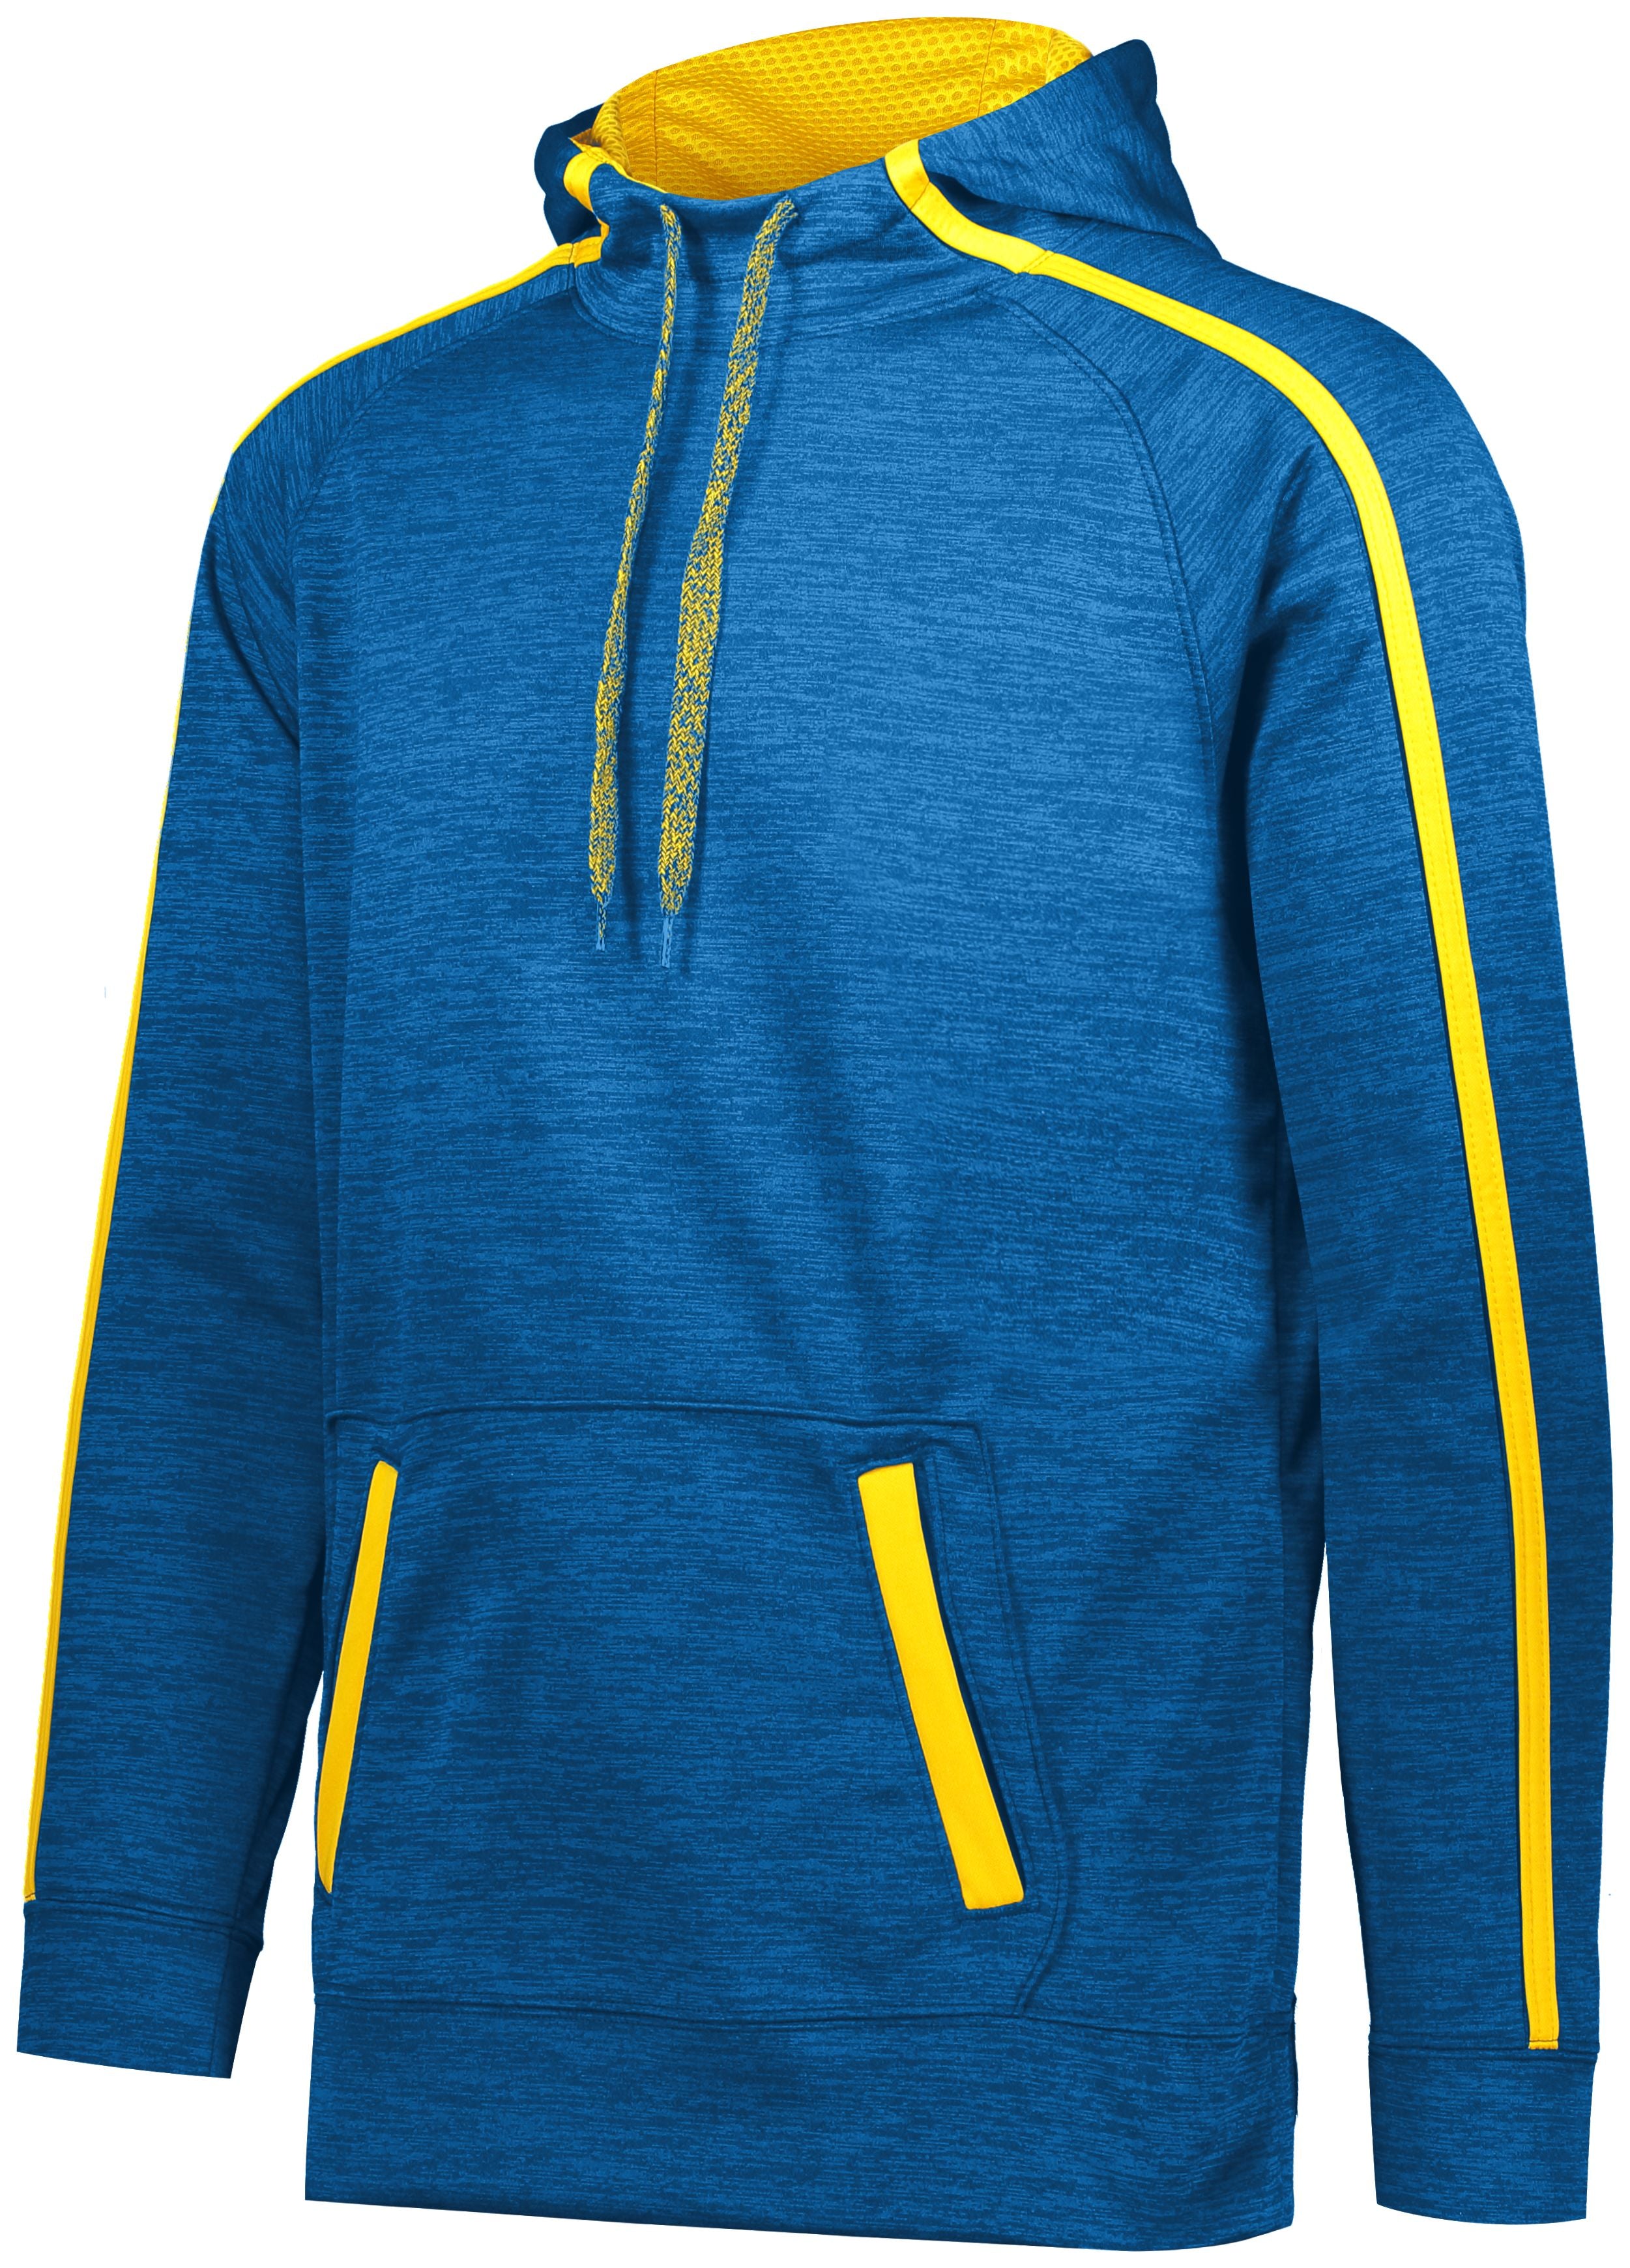 Augusta Sportswear Stoked Tonal Heather Hoodie in Royal/Gold  -Part of the Adult, Augusta-Products, Shirts, Tonal-Fleece-Collection product lines at KanaleyCreations.com